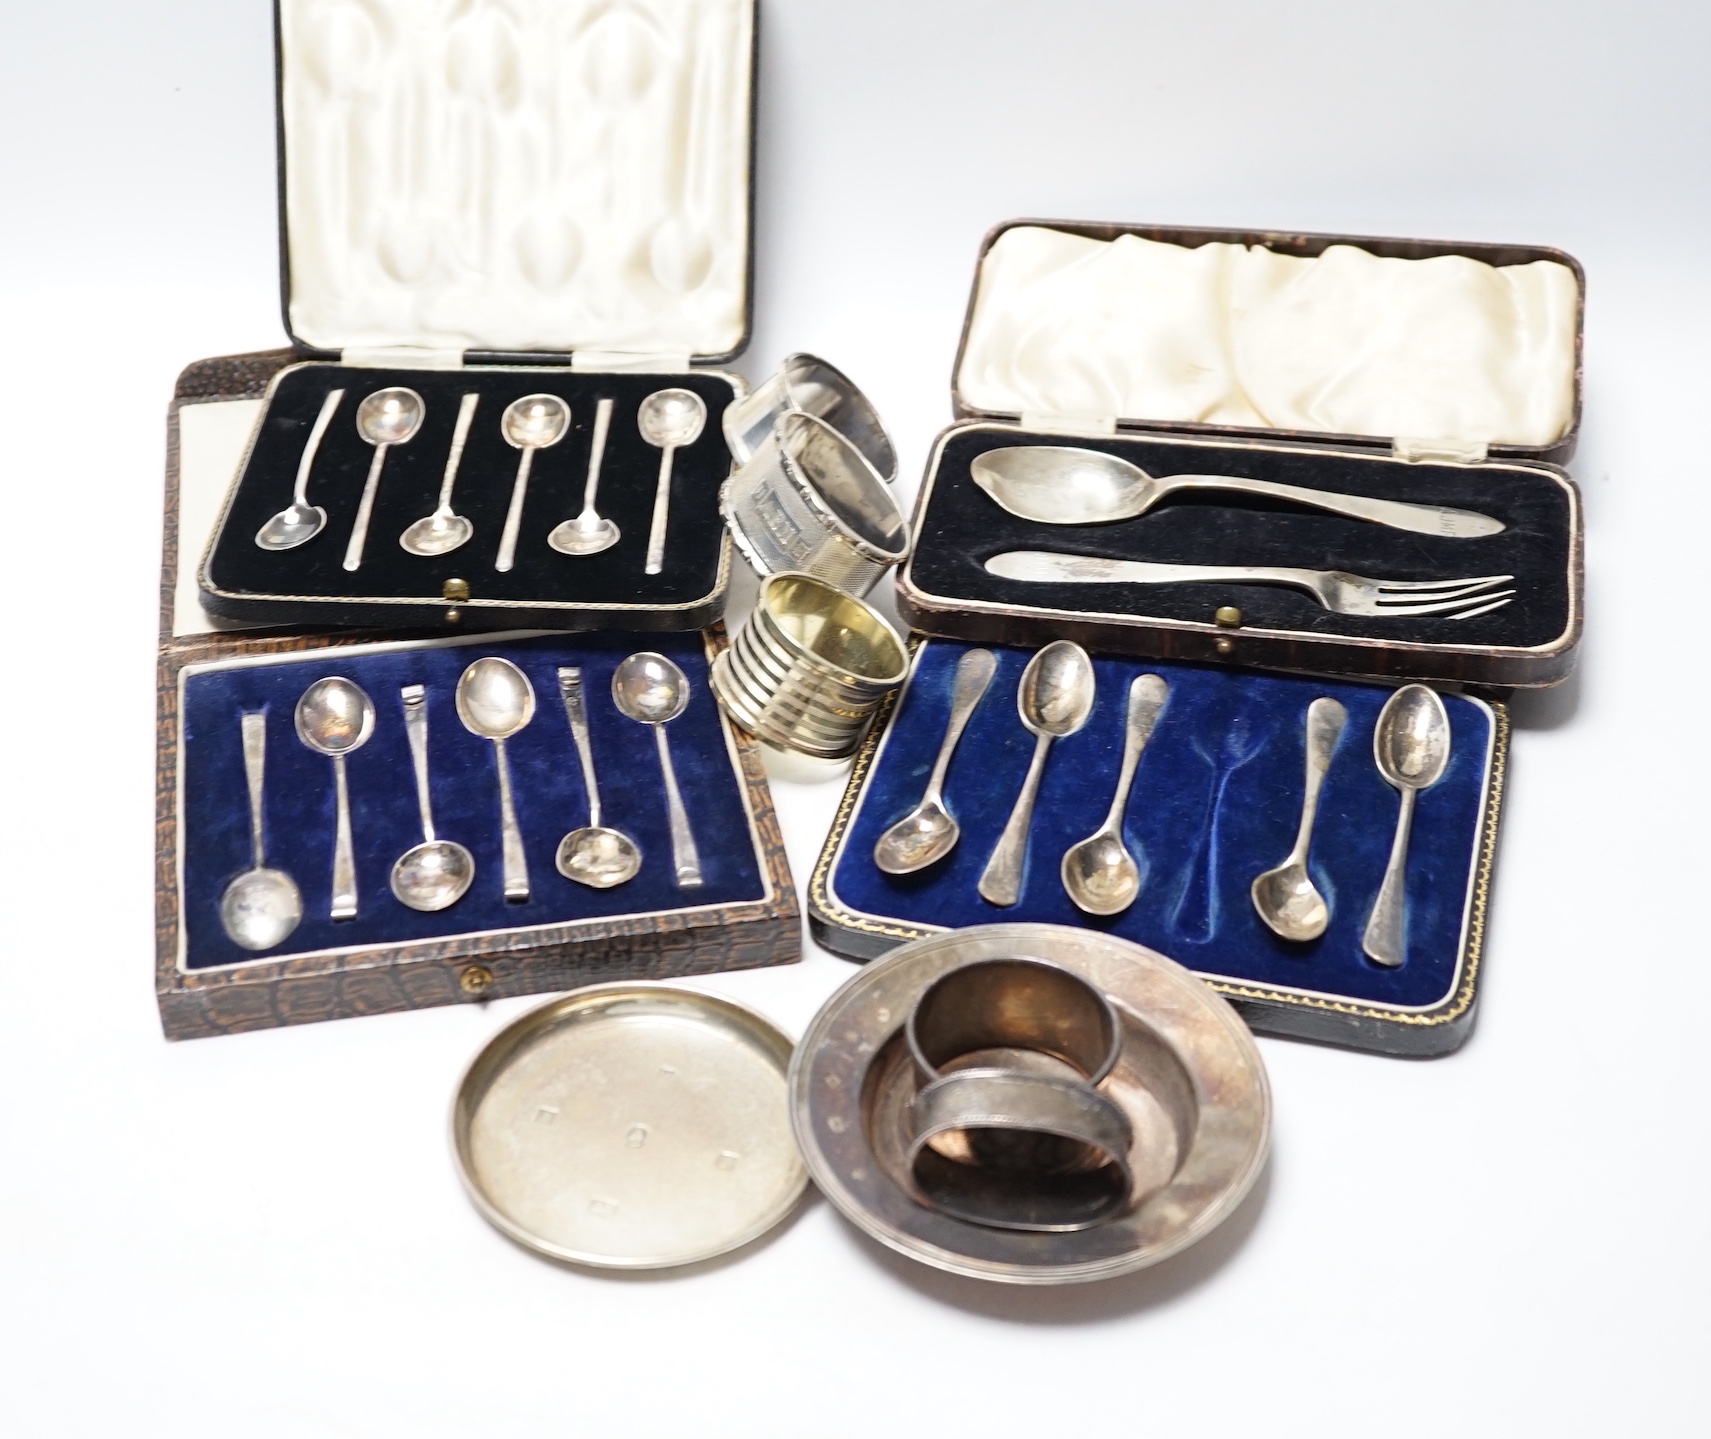 Four various silver serviette rings and a plated napkin ring, two small silver dishes, three various boxed sets of silver flatware and one part set of silver flatware.